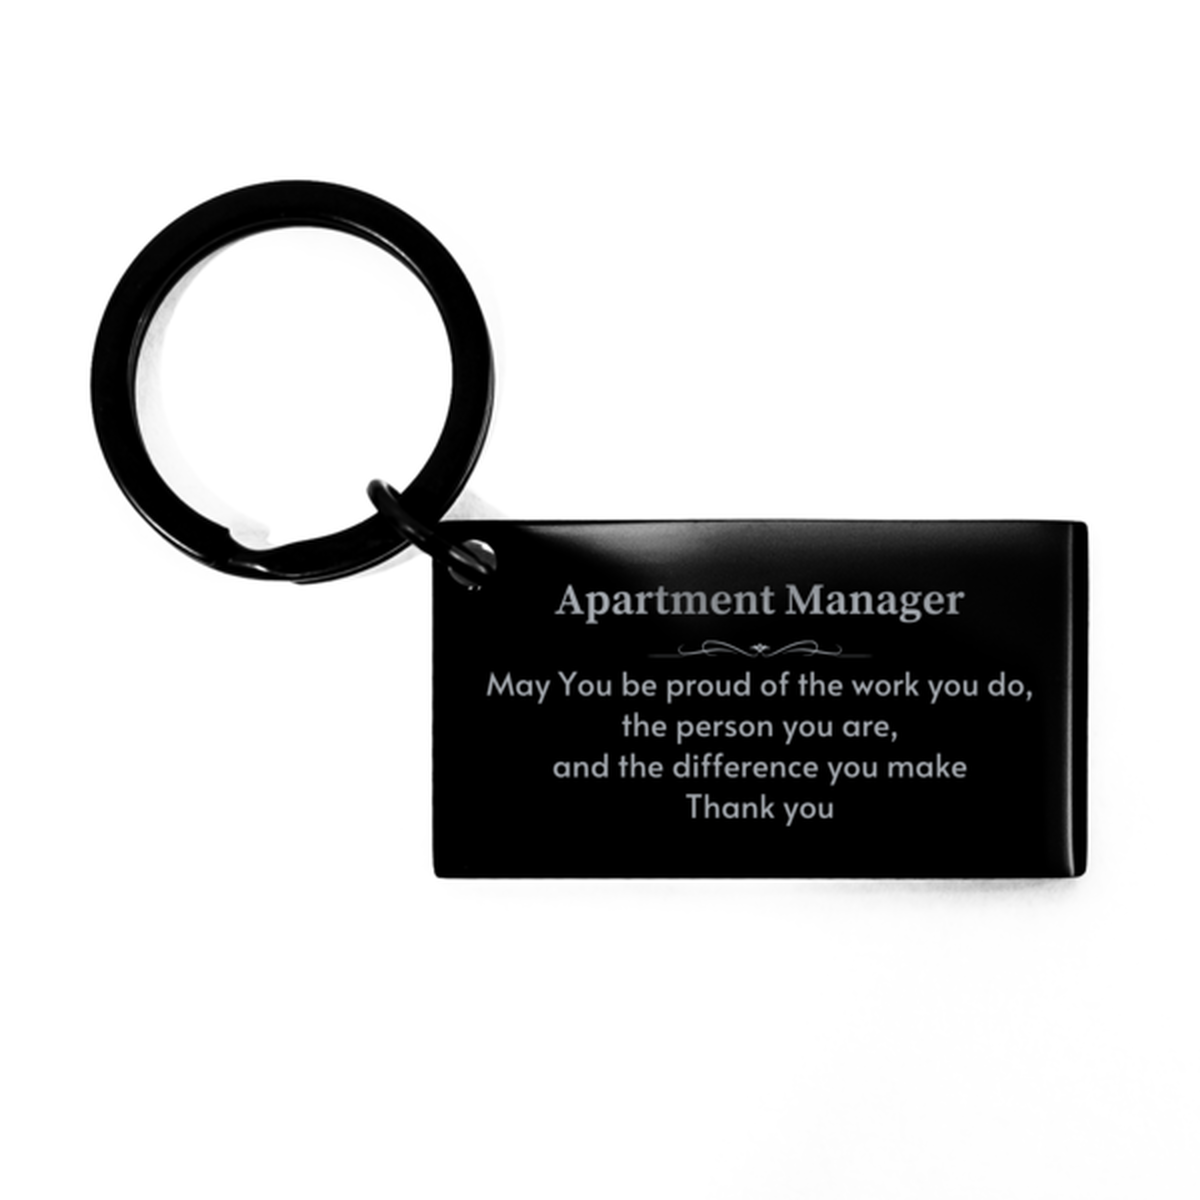 Heartwarming Keychain Retirement Coworkers Gifts for Apartment Manager, Clerk May You be proud of the work you do, the person you are Gifts for Boss Men Women Friends